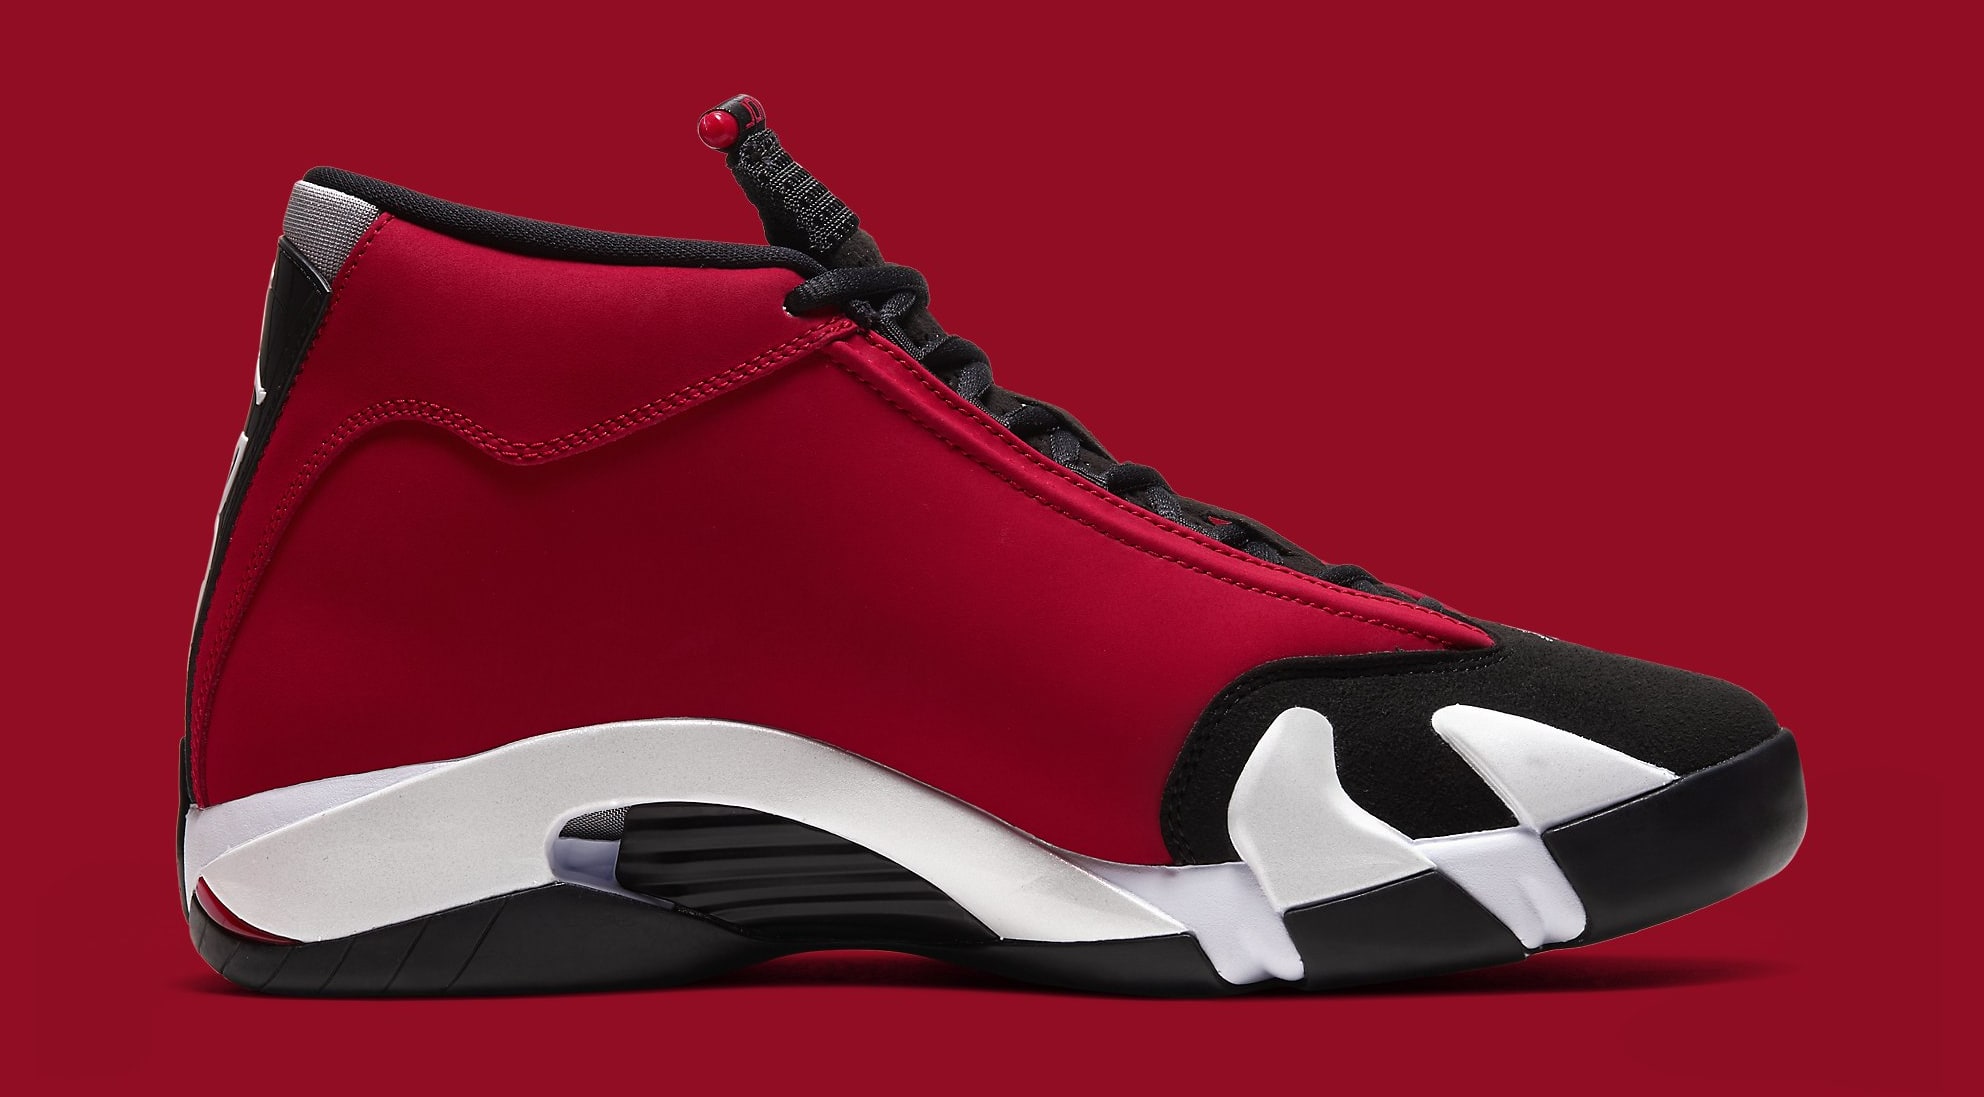 the Air Jordan 14 Gym Red has been pushed back to July 2nd